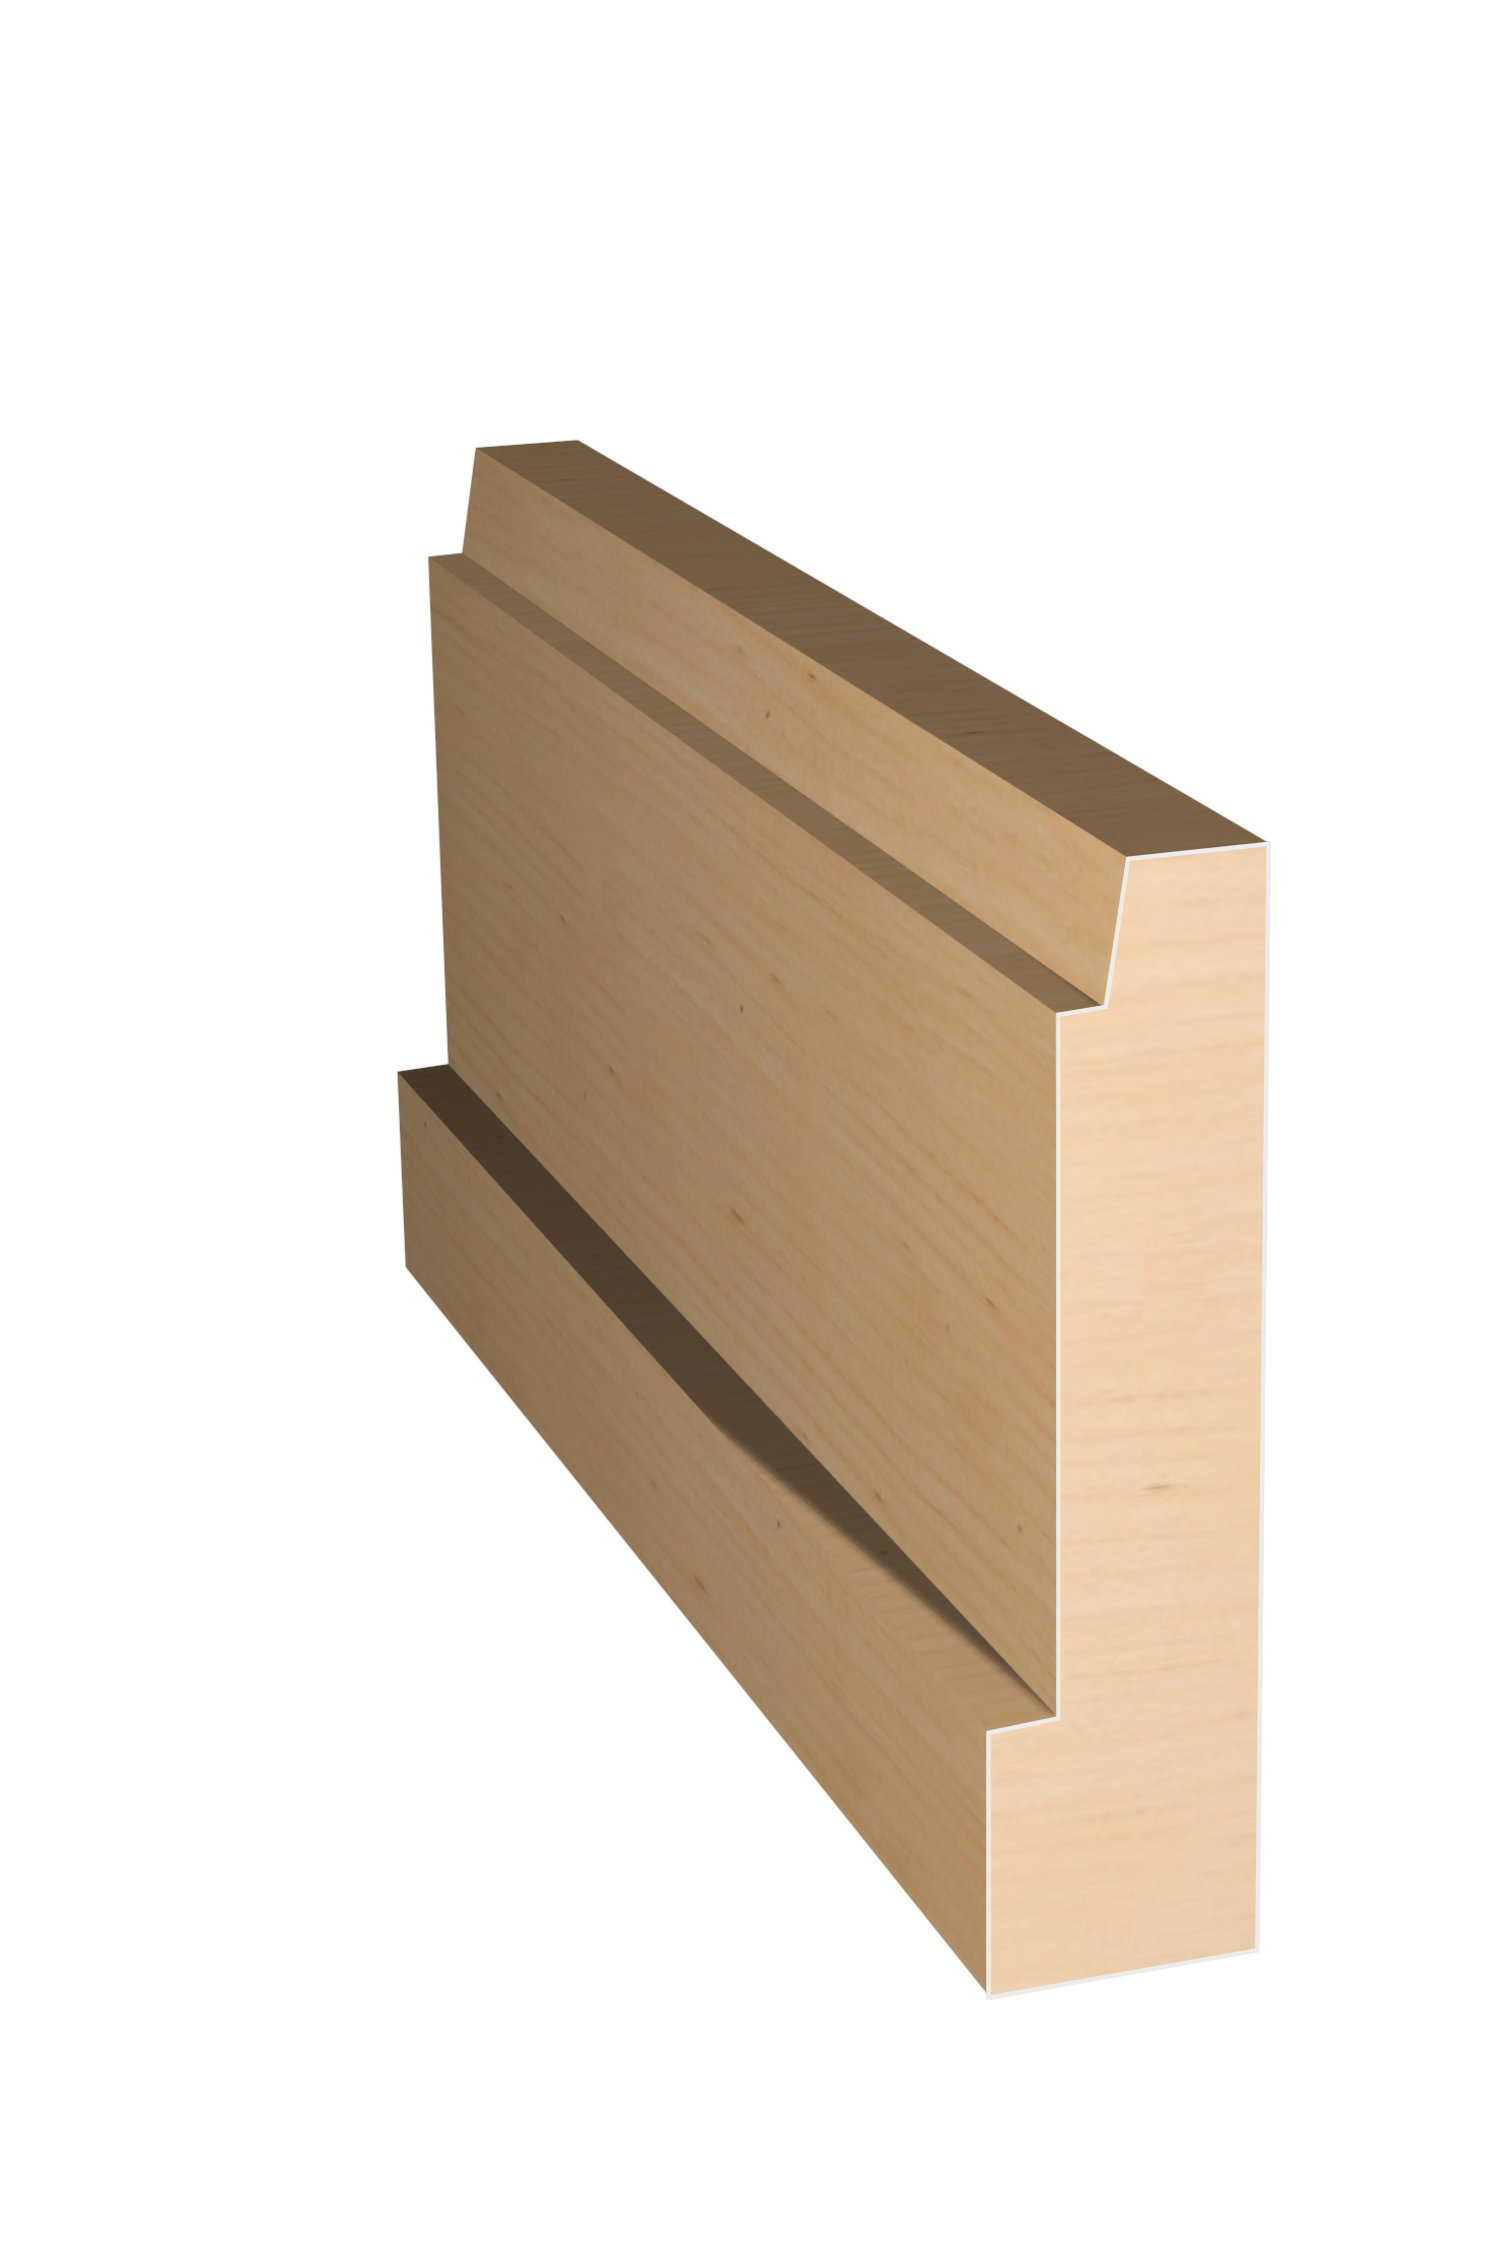 Three dimensional rendering of custom casing wood molding CAPL39 made by Public Lumber Company in Detroit.